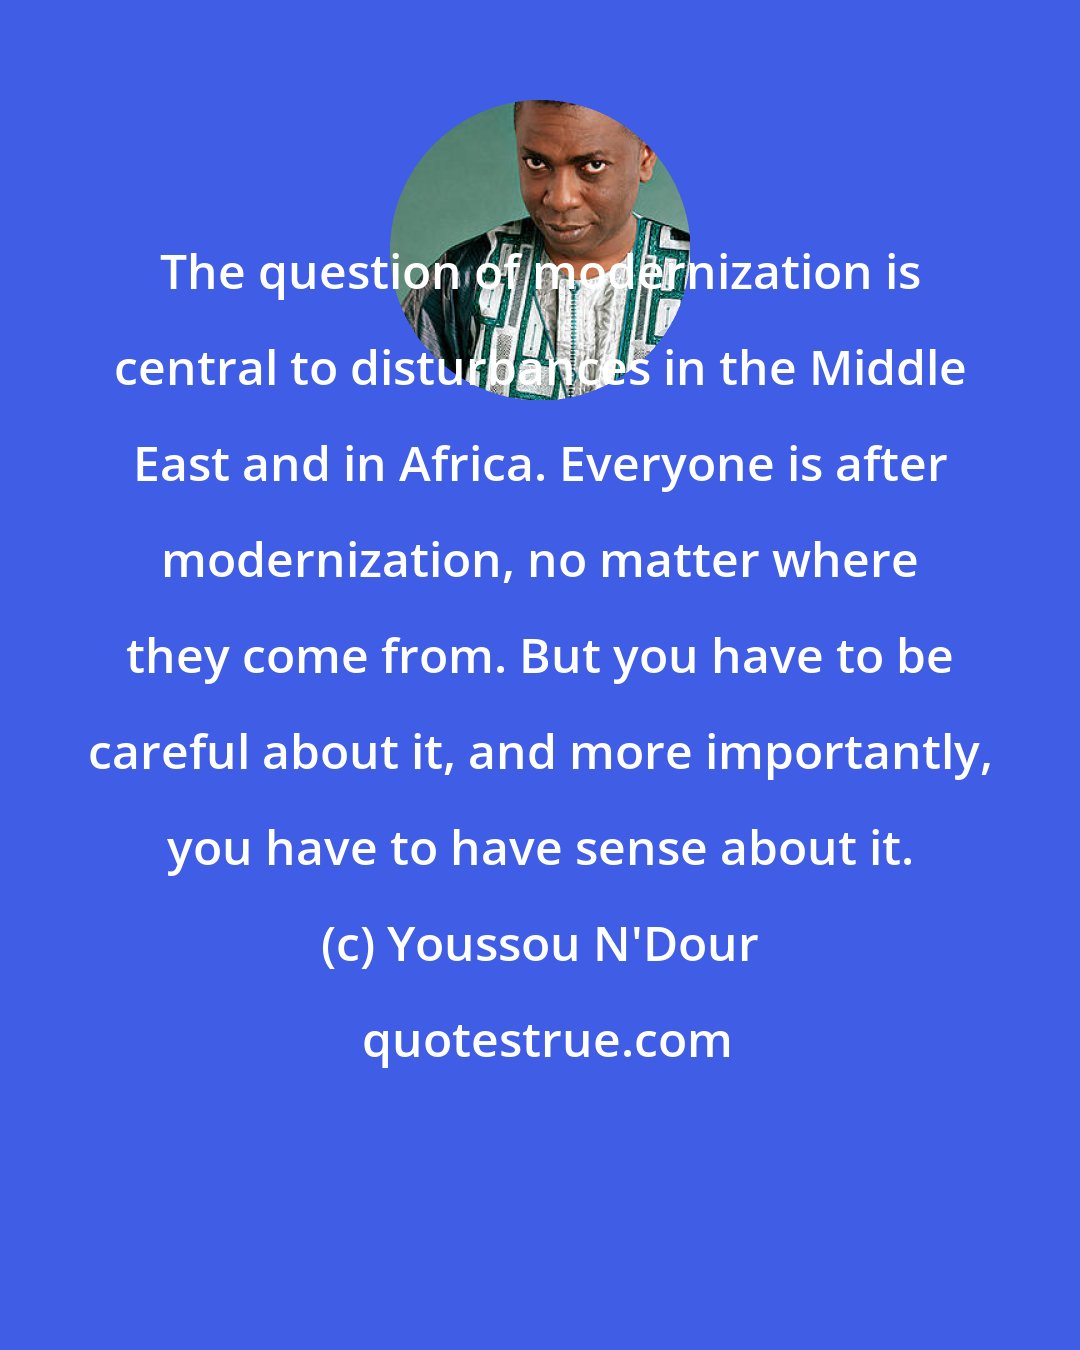 Youssou N'Dour: The question of modernization is central to disturbances in the Middle East and in Africa. Everyone is after modernization, no matter where they come from. But you have to be careful about it, and more importantly, you have to have sense about it.